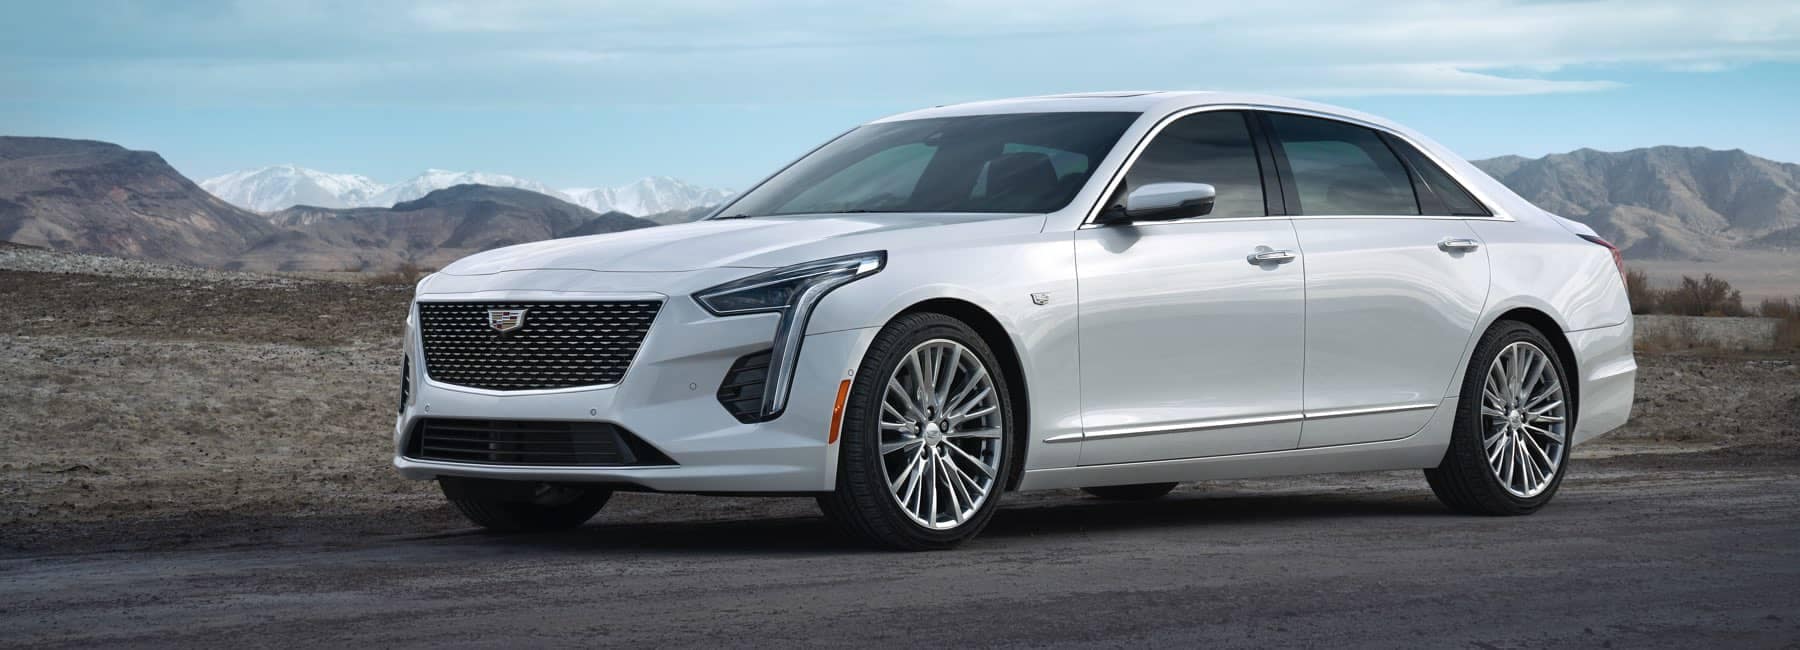 2020 Cadillac CT6 driving down road with mountains in background